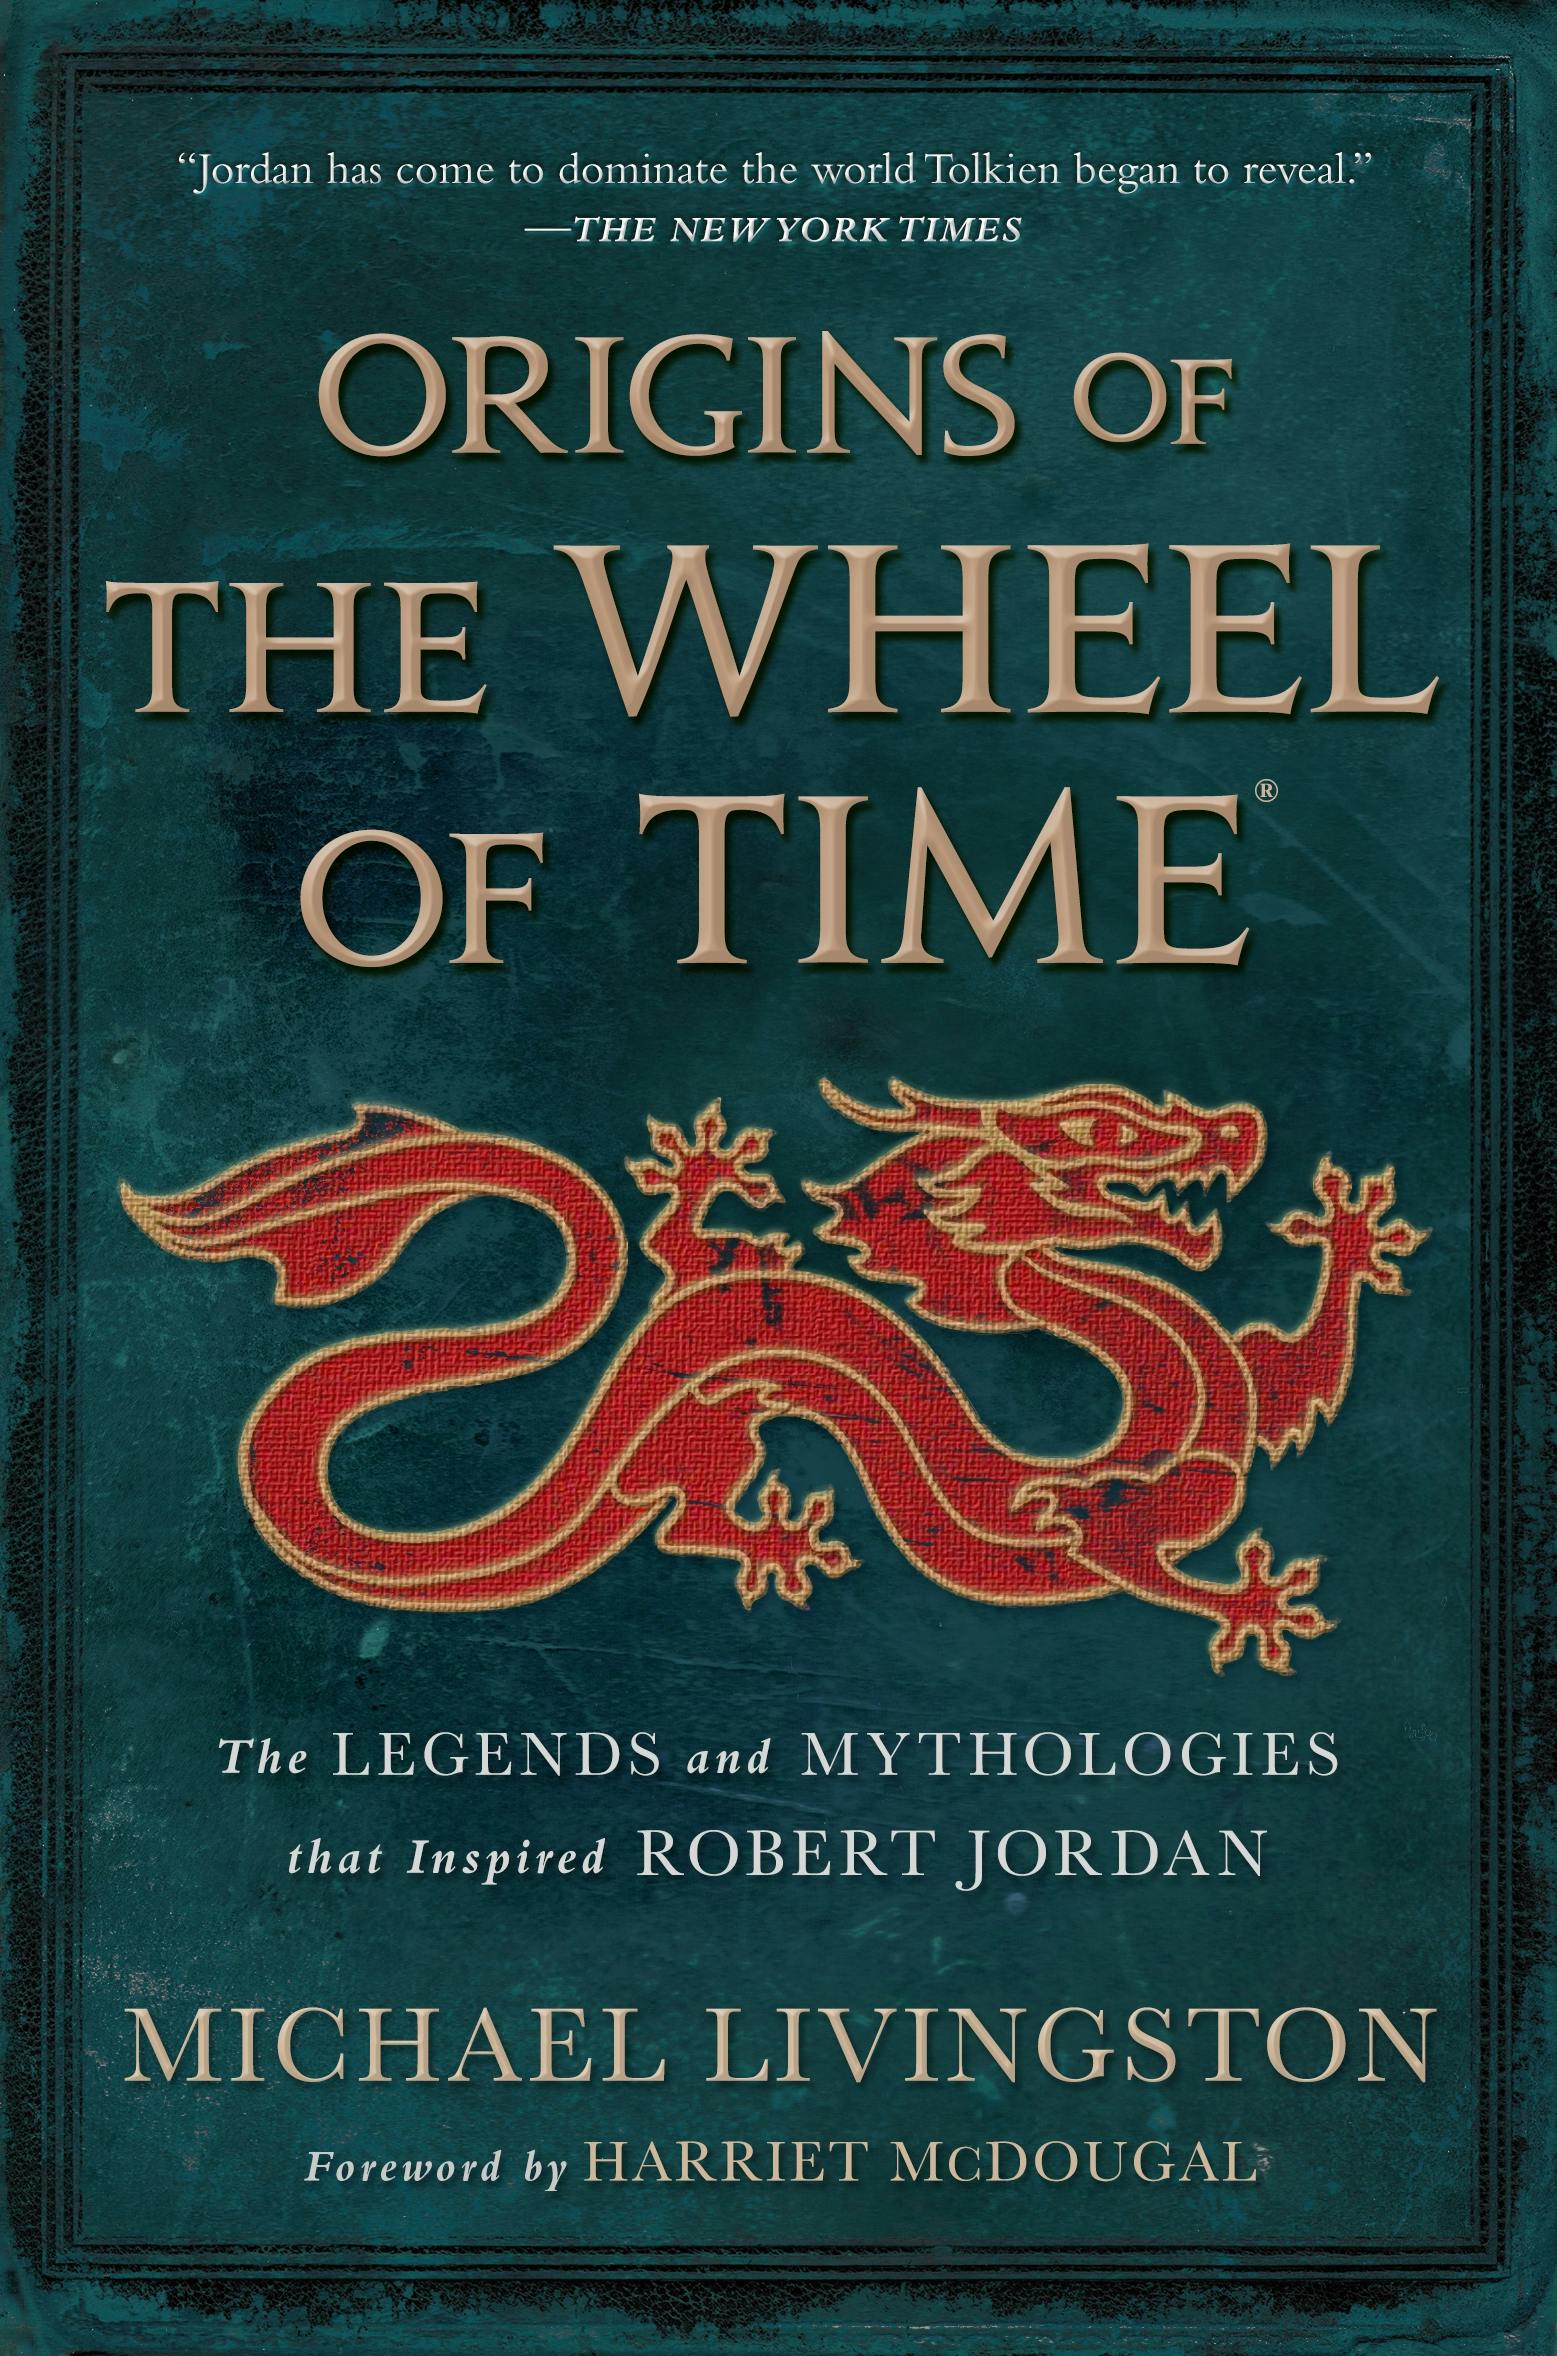 Cover for the book titled as: Origins of The Wheel of Time